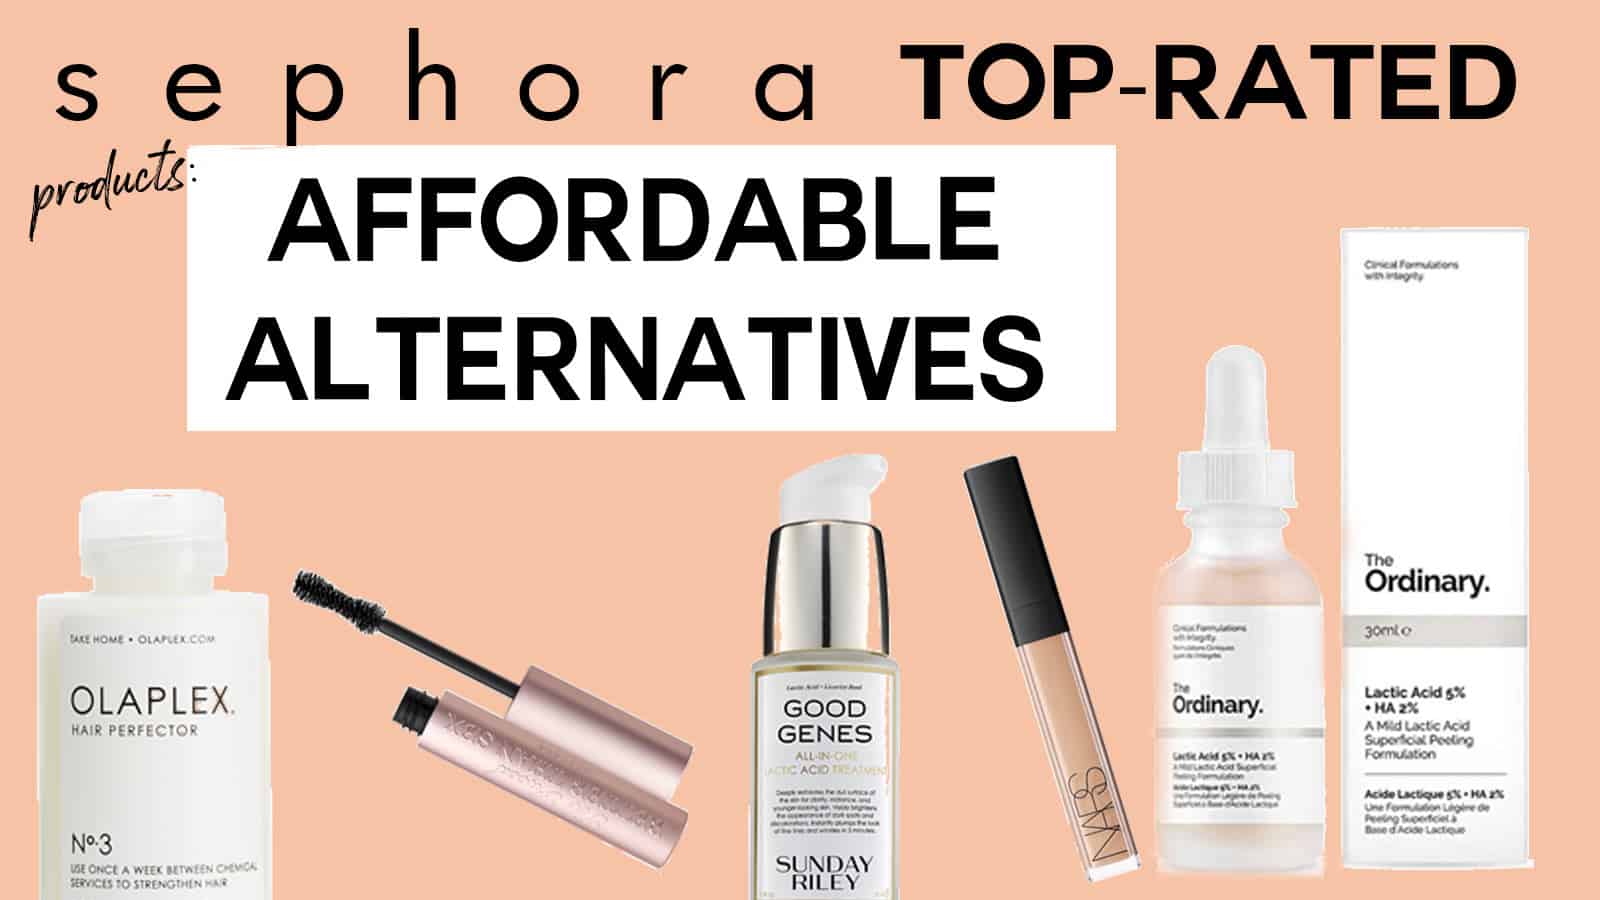 10 Affordable Beauty Alternatives to these Sephora Top-Rated Products